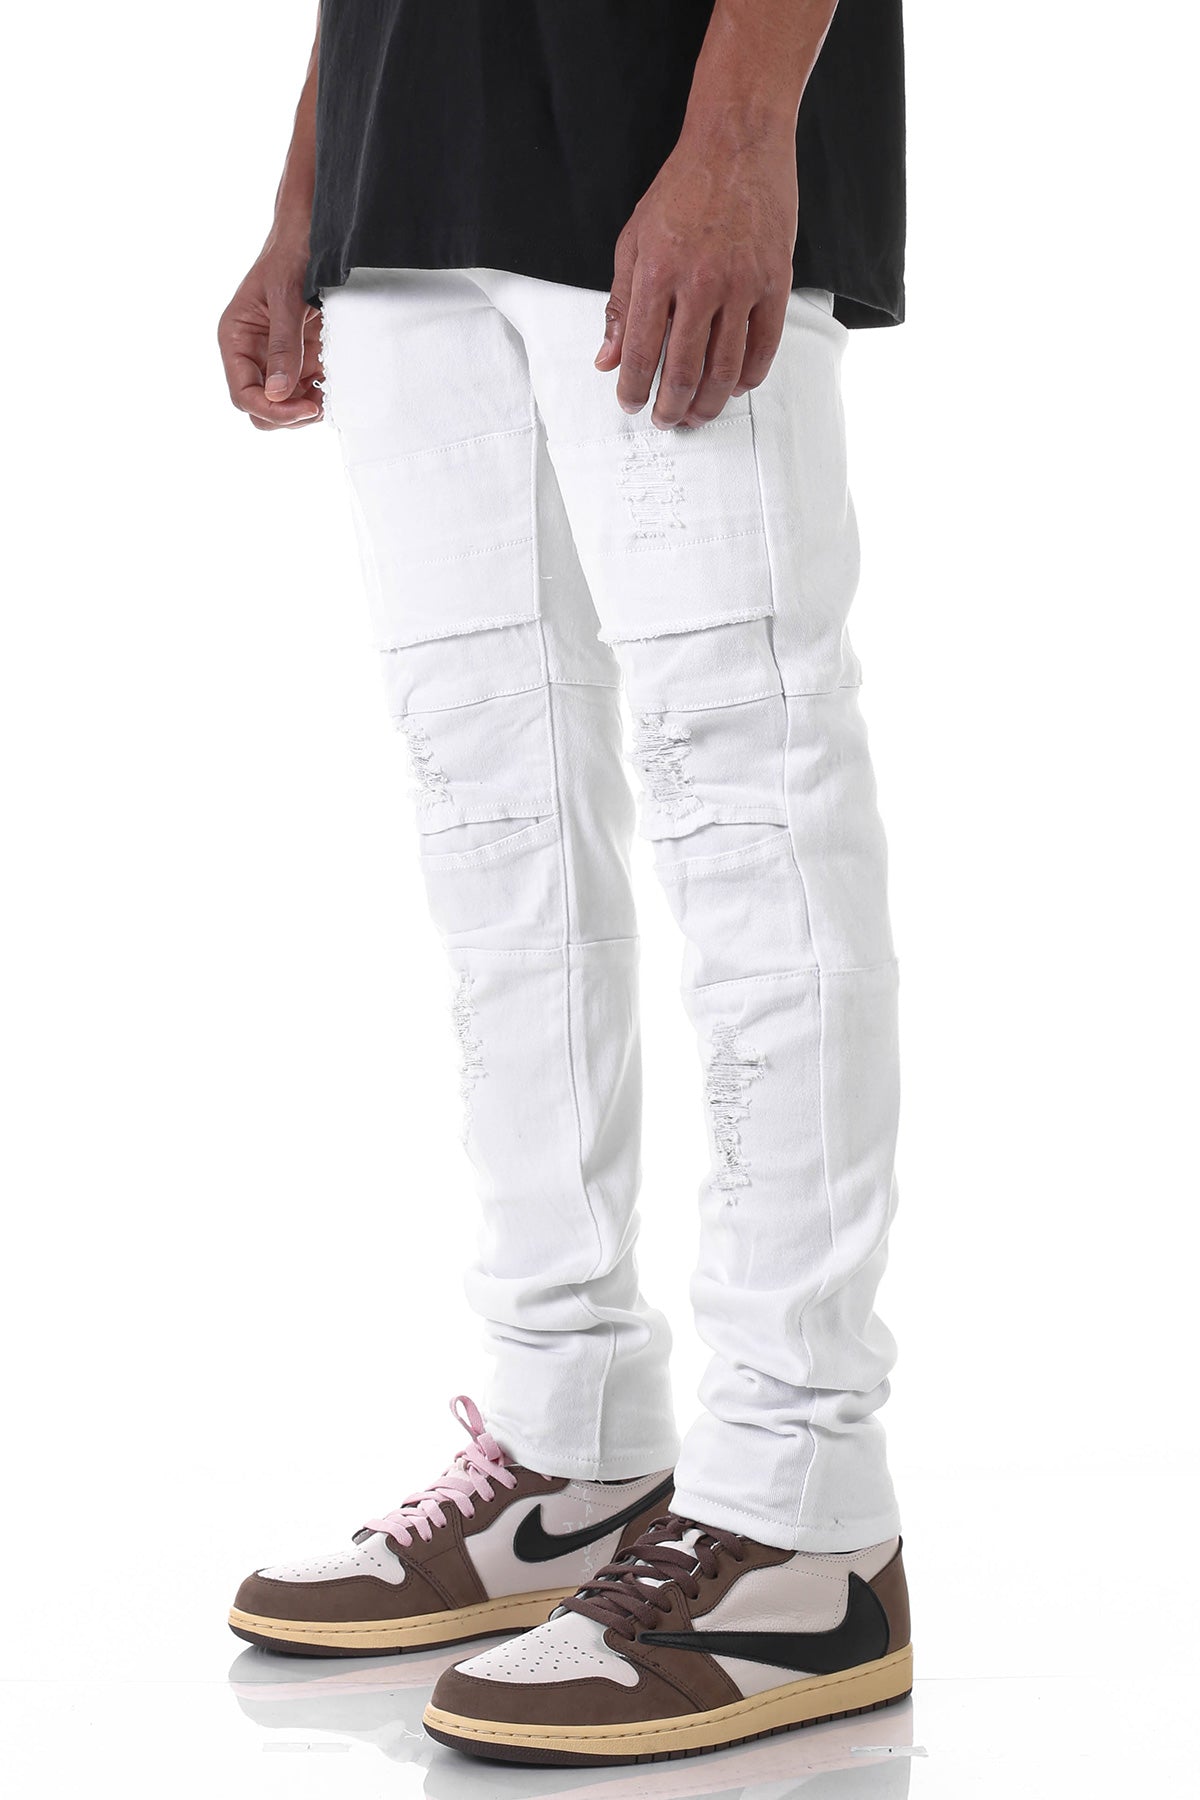 Destroyed Jeans with Panels (White) (1602822570086)